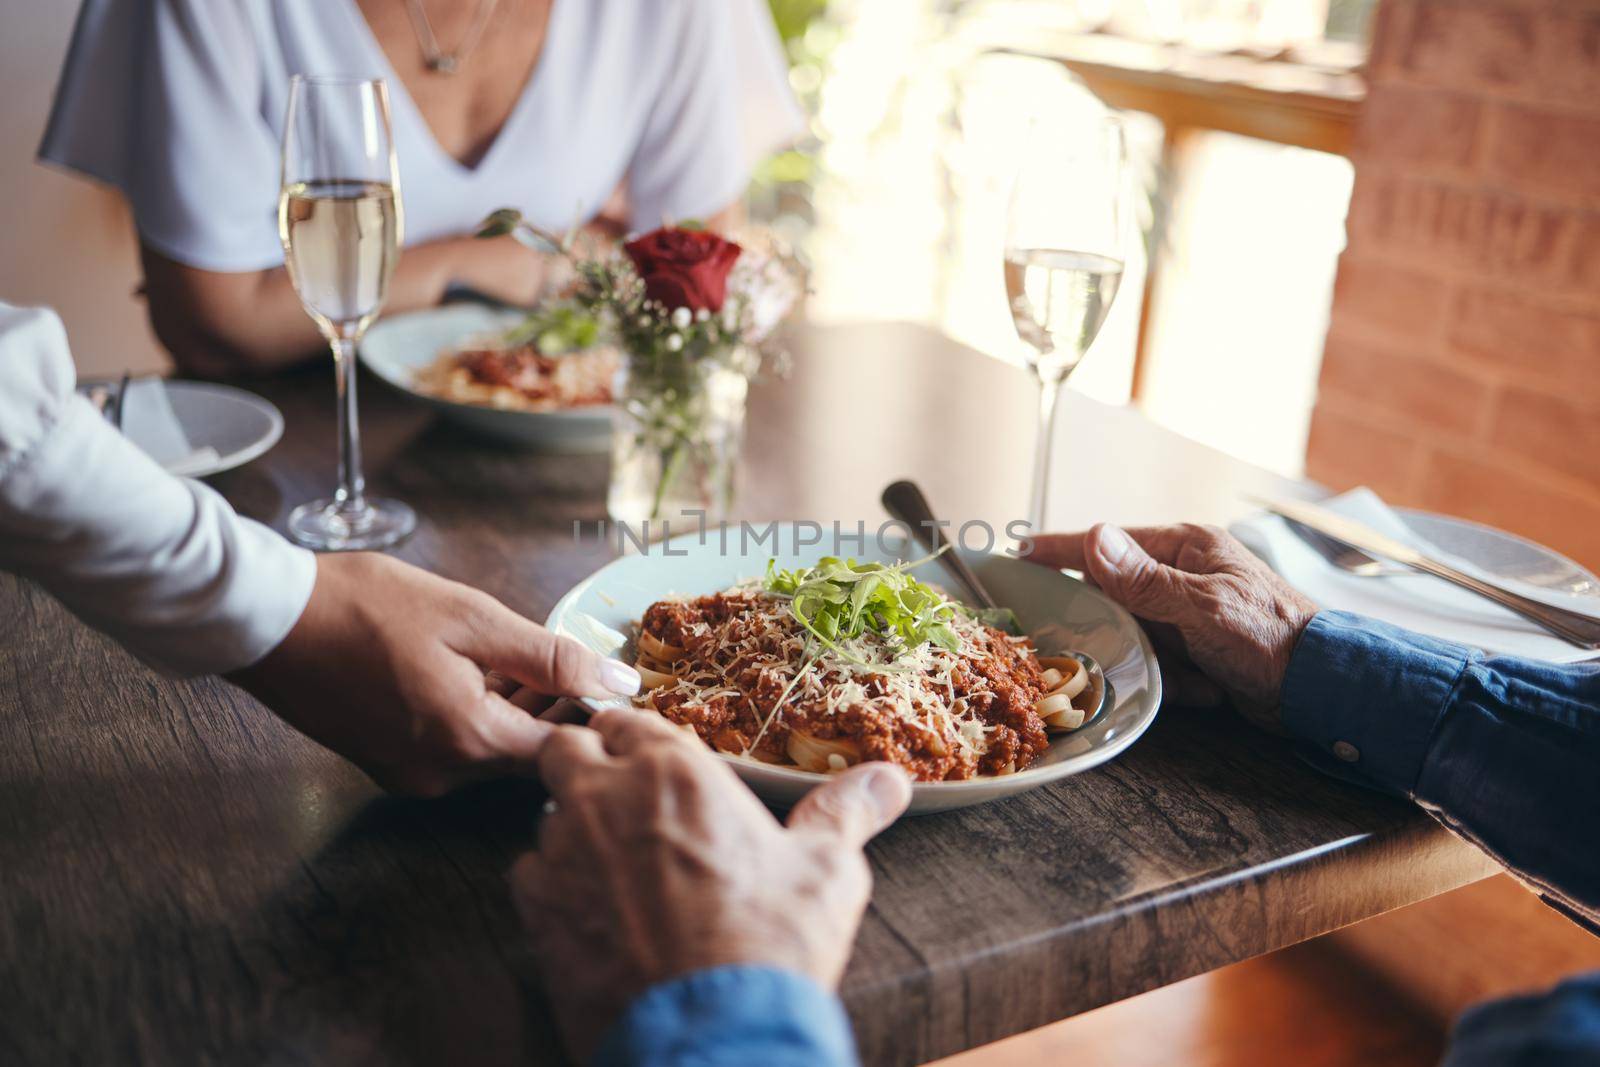 Food service, wine and couple at table with hospitality from waiter at restaurant for lunch. Cafe worker with plate of pasta for man and woman on date for anniversary or marriage at fine dining cafe.